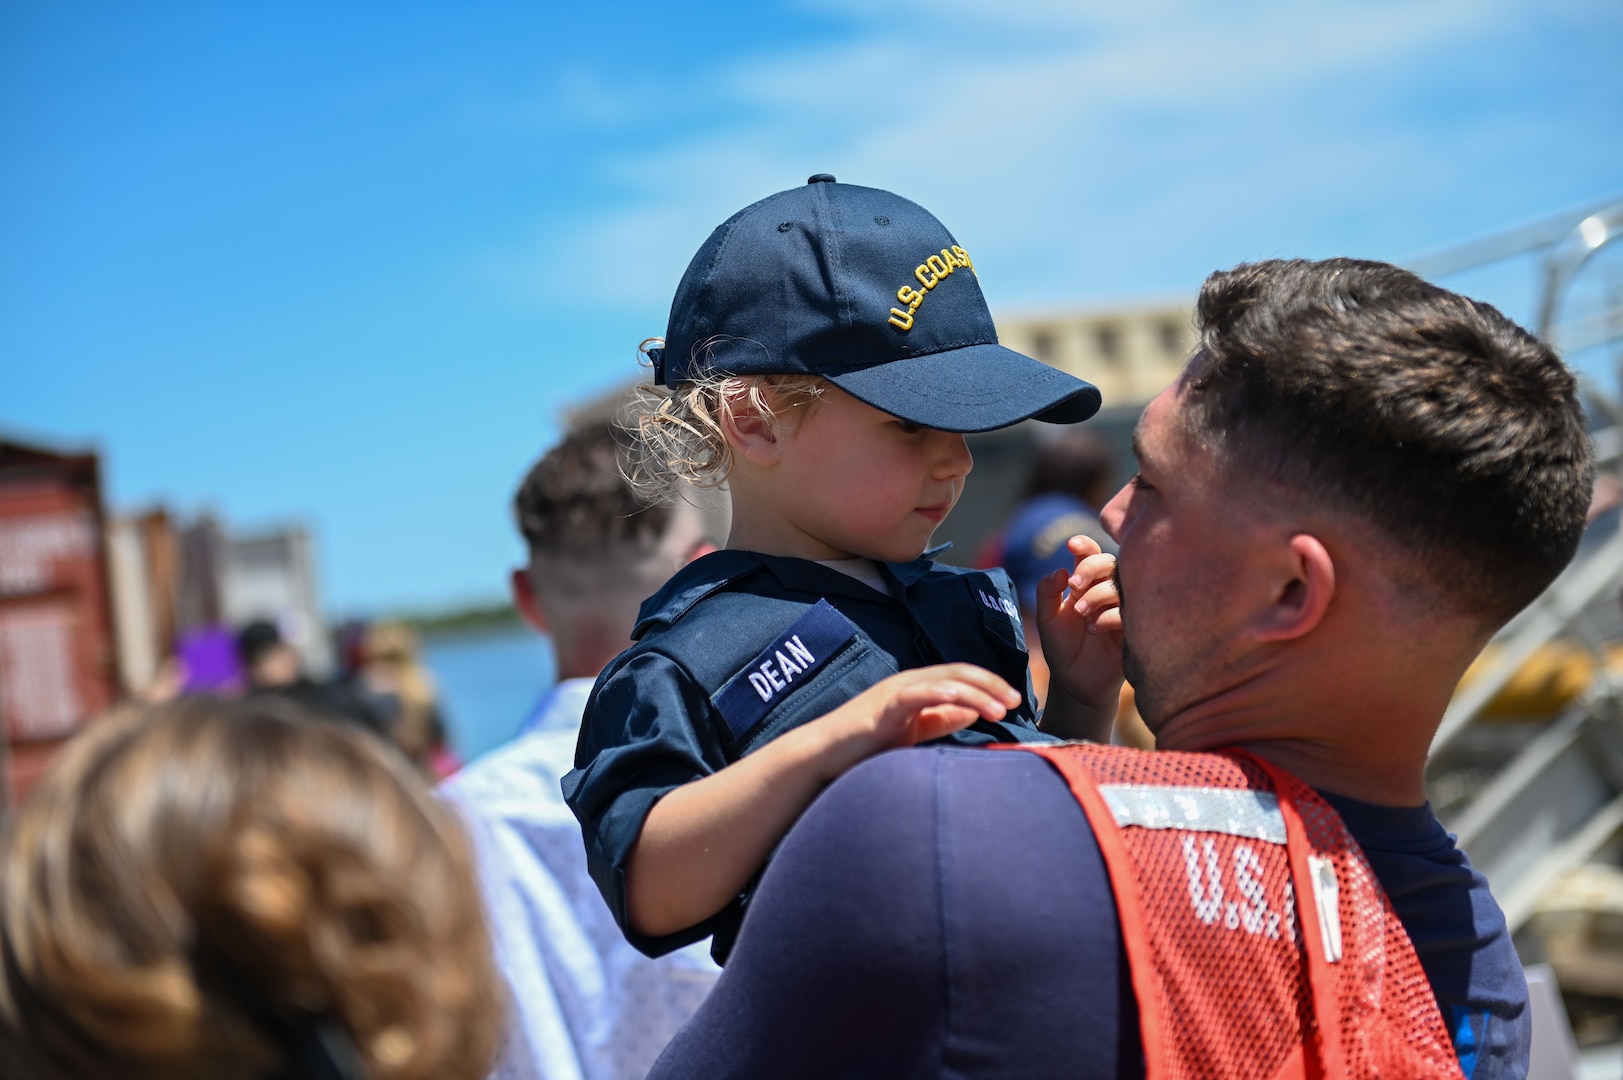 U.S. Coast Guard Petty Officer 1st Class Dylan Dean, an operations specialist assigned to USCGC Stone (WMSL 758), embraces loved ones in North Charleston, South Carolina, April 23, 2023. Stone's crew returned to their home port following a 105-day patrol in the South Atlantic Ocean, Caribbean Sea and Florida Straits. (U.S. Coast Guard photo by Petty Officer 3rd Class Riley Perkofski)